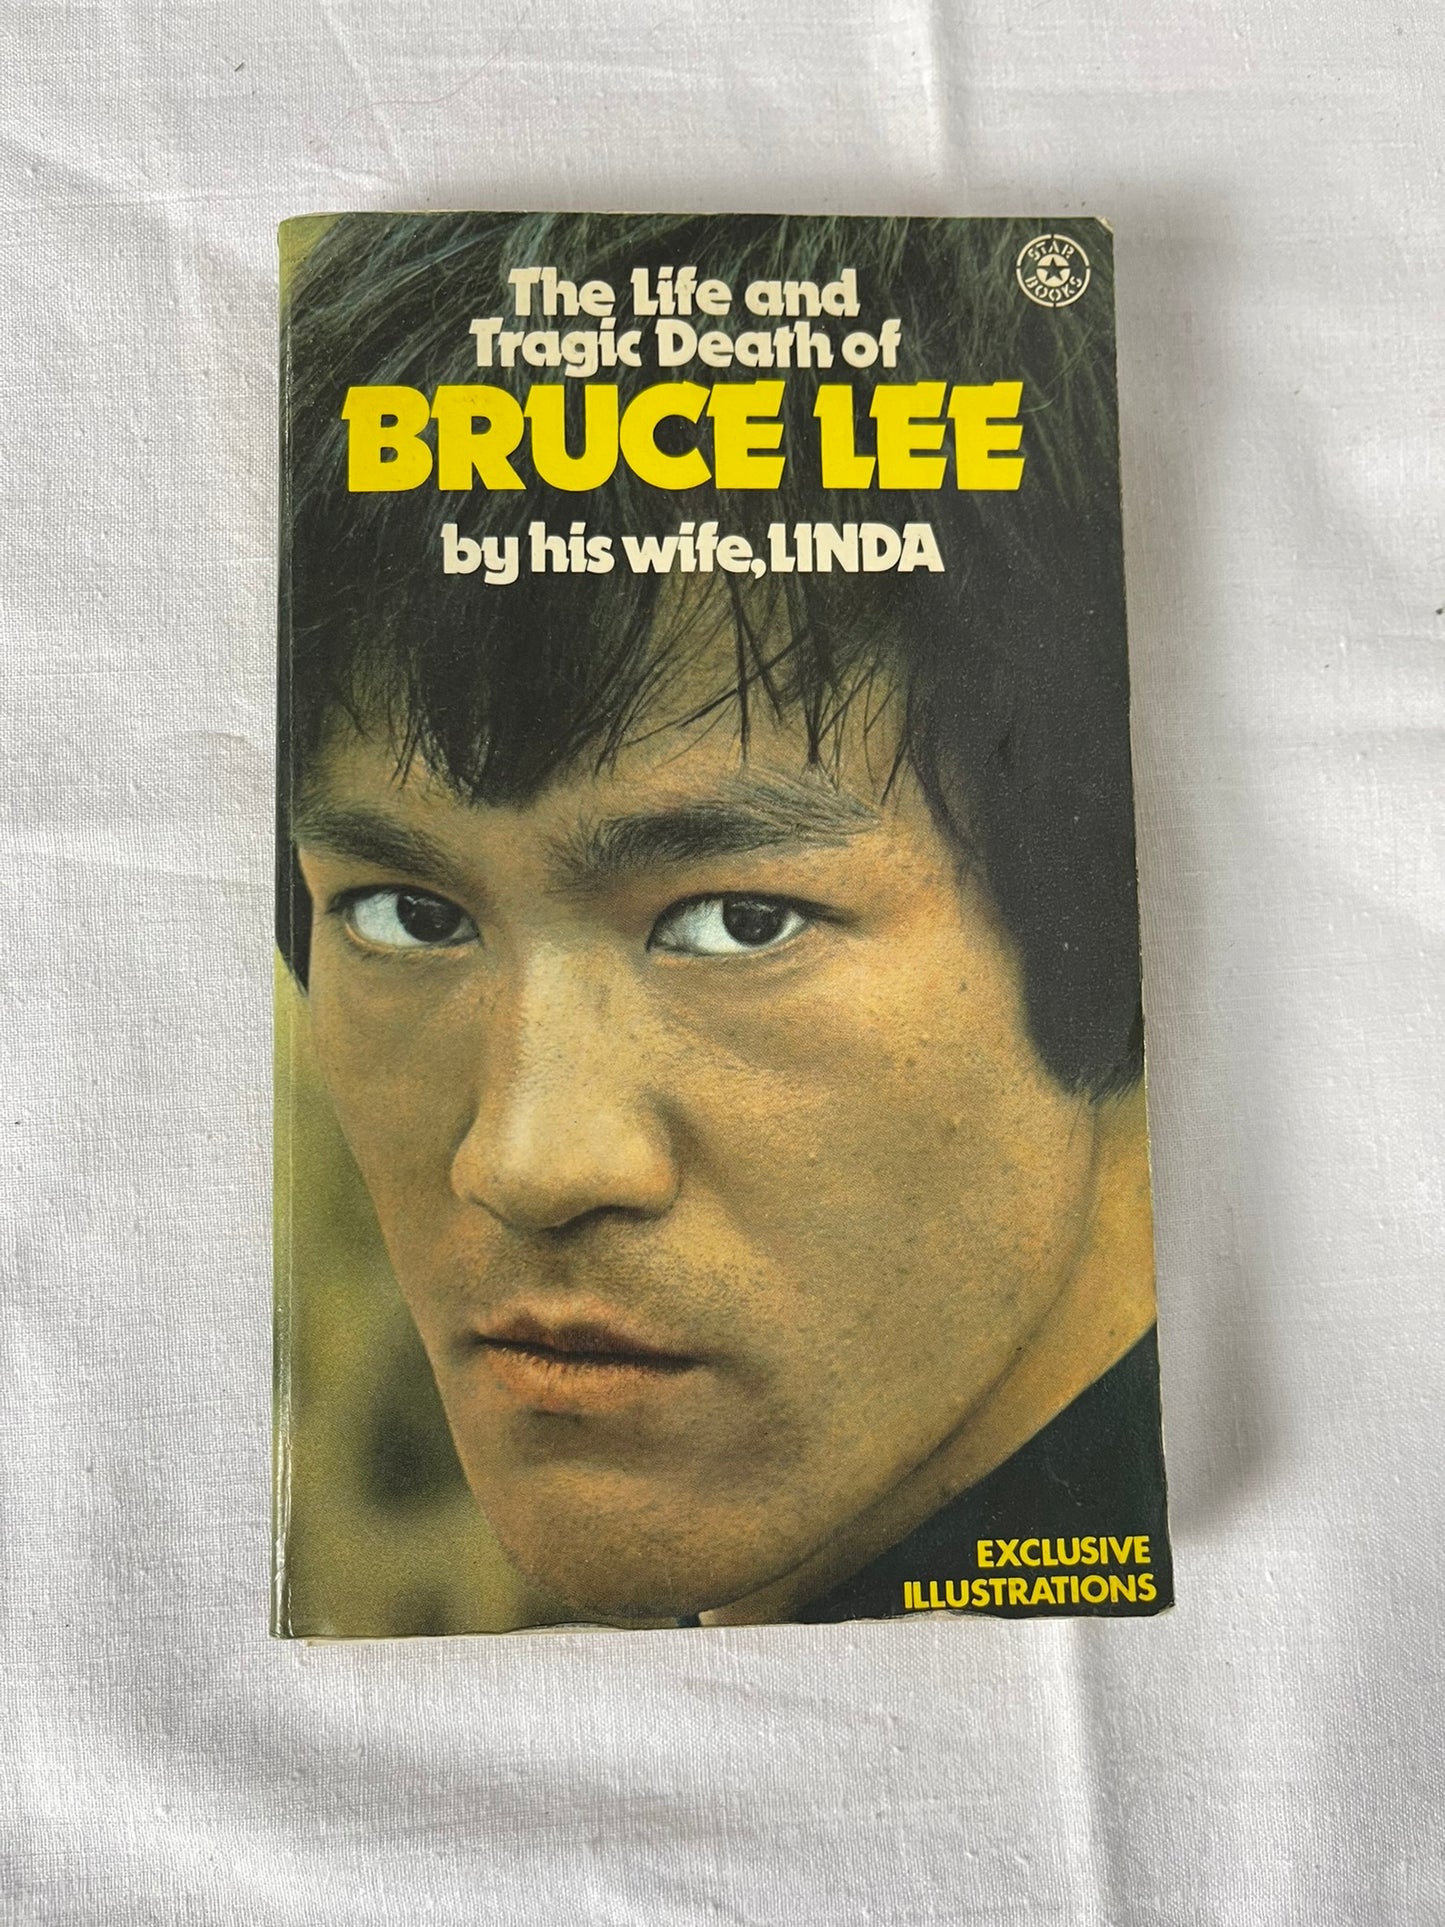 The Life and Tragic Death of Bruce Lee by His Wife Linda